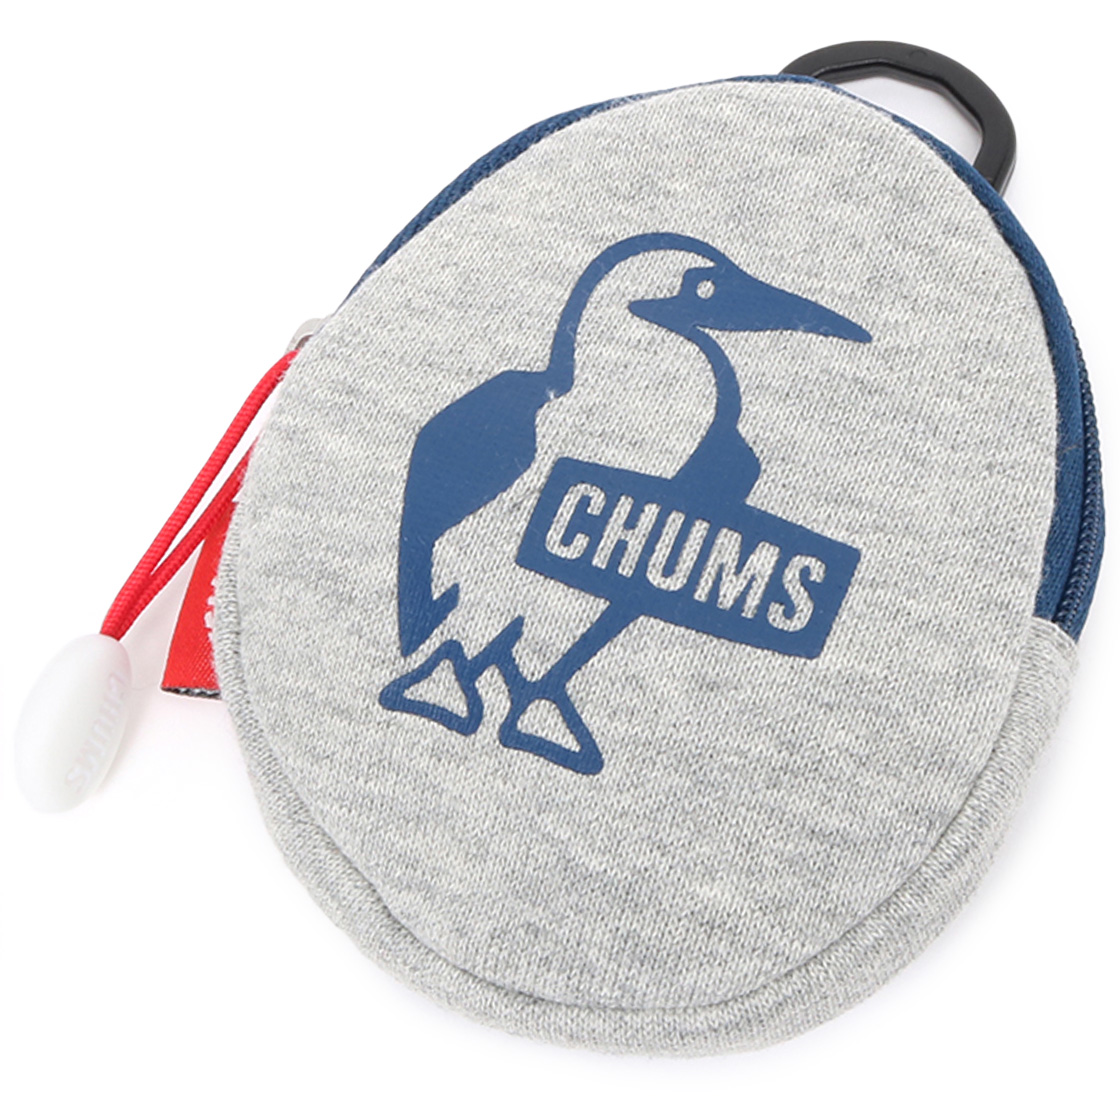 CHUMS 財布 Egg Coin Case Sweat エッグ コインケース スウェット チャムス